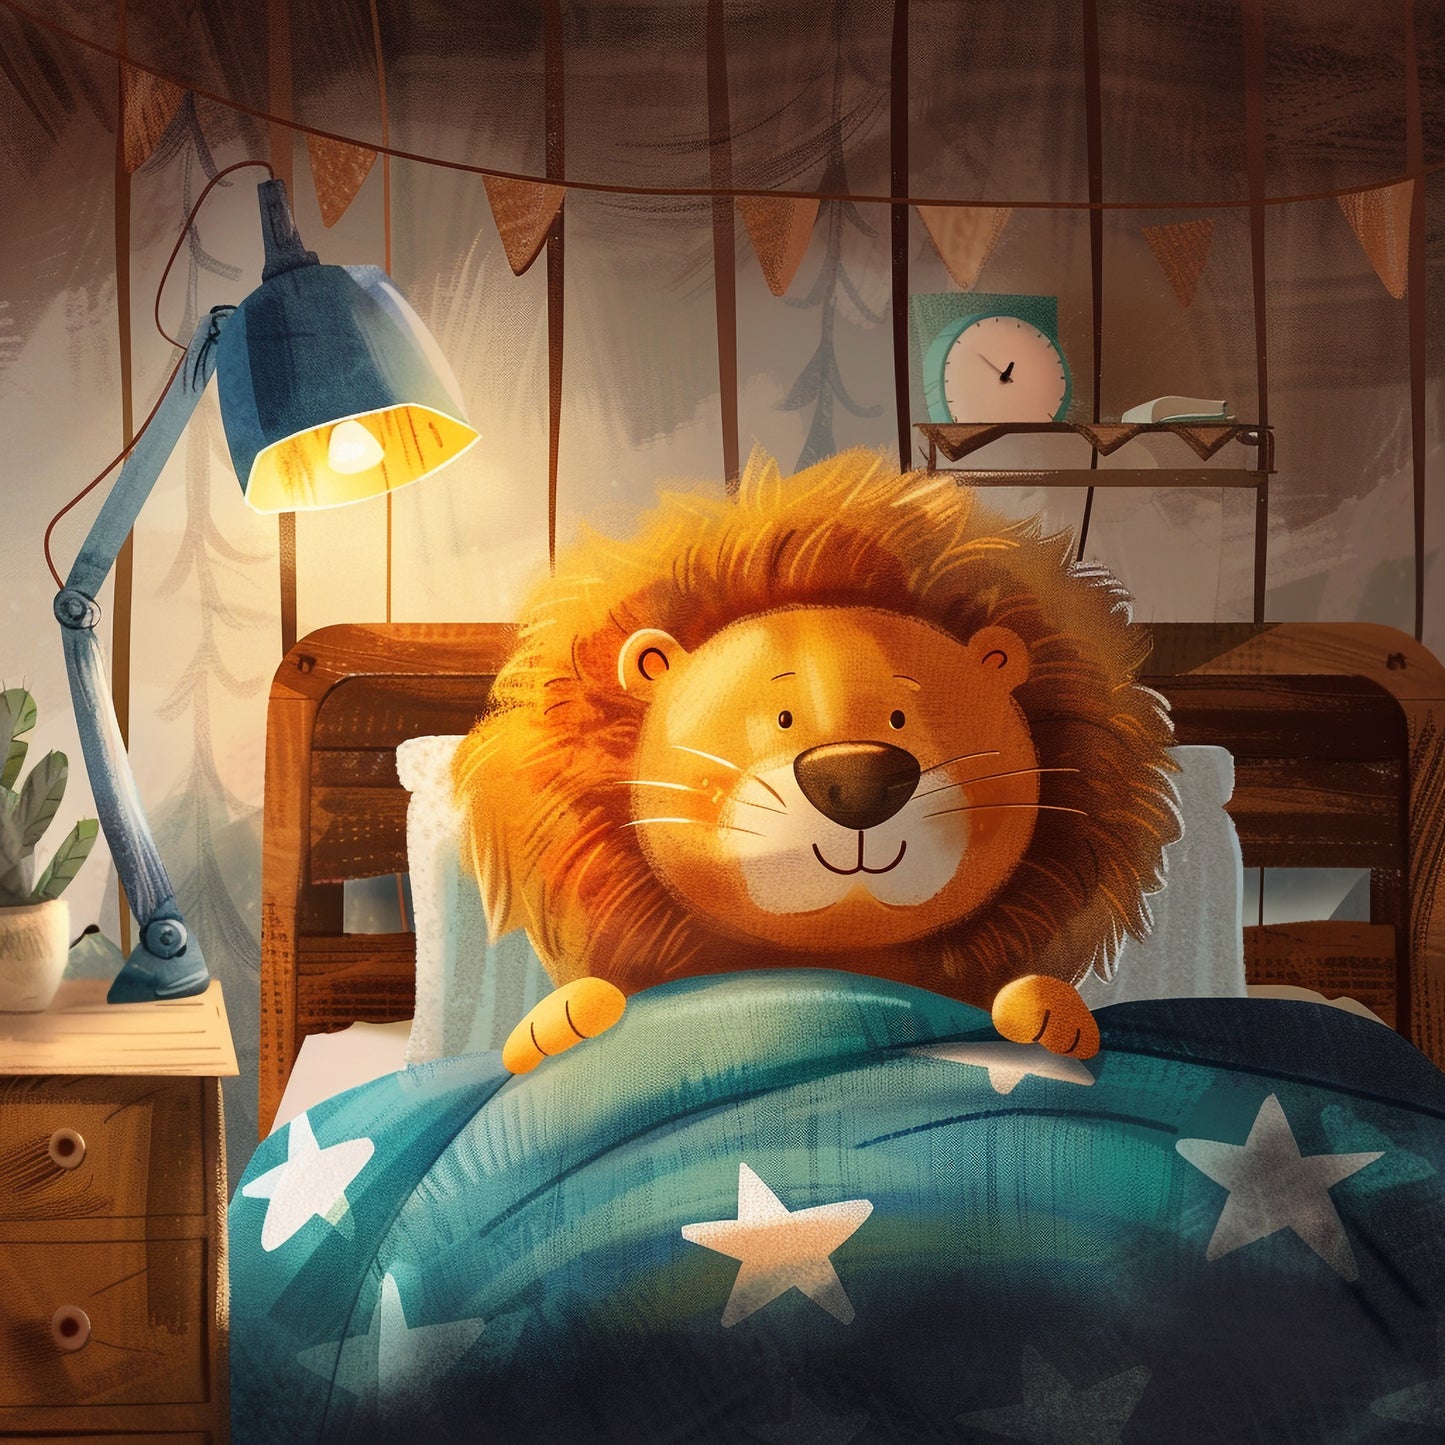 Cozy Lion Relaxing in a Bedroom at Night Illustration